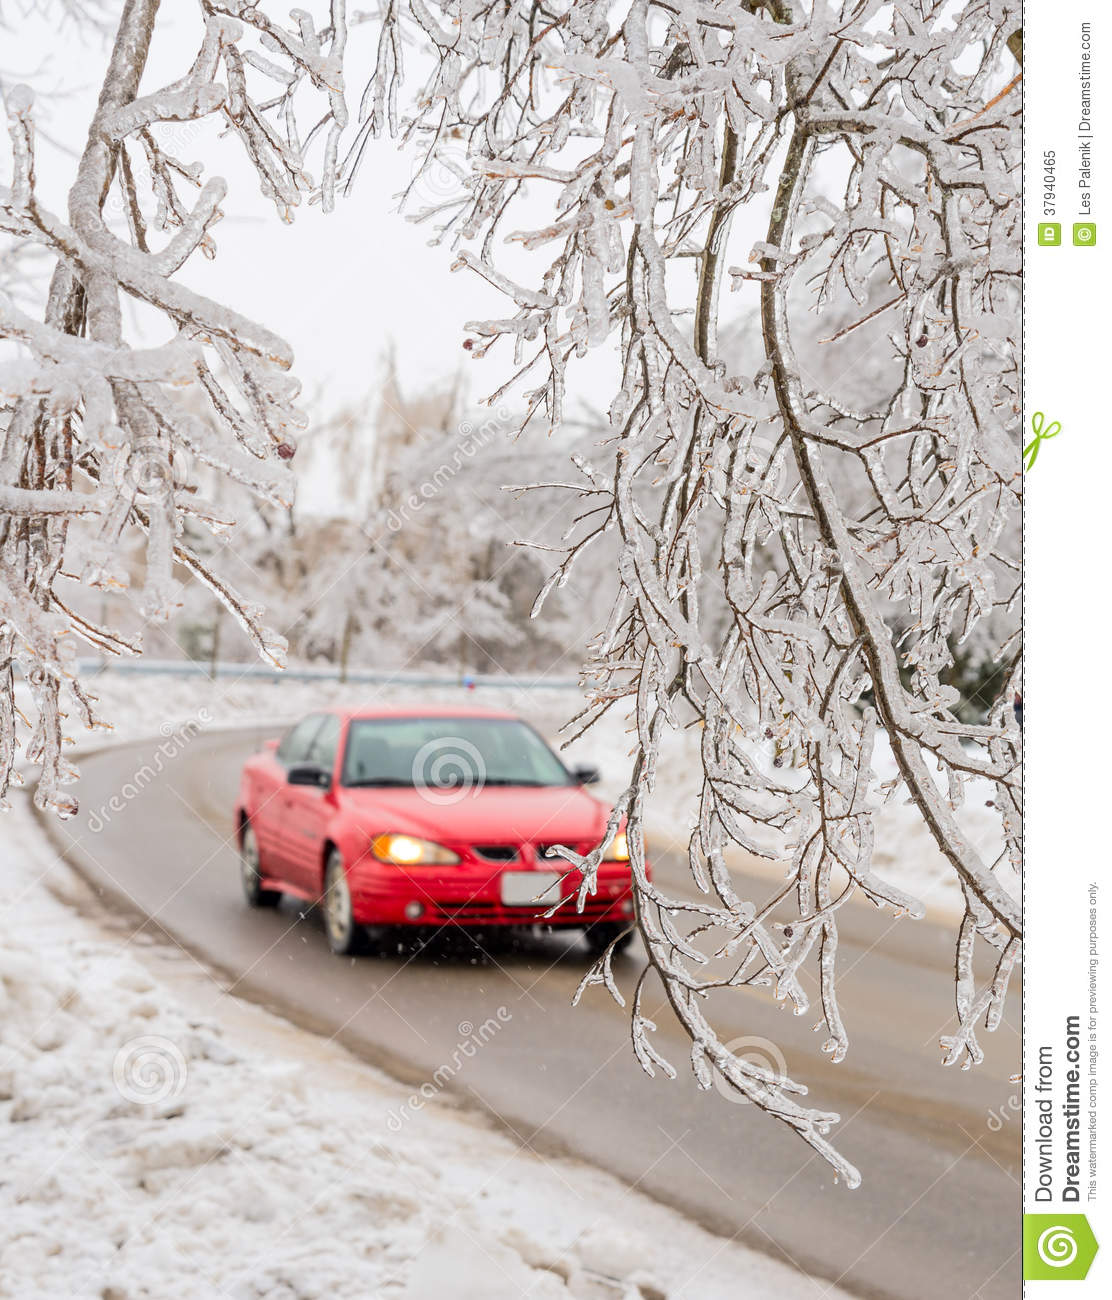 Winter Driving Royalty Free Stock Photo   Image  37940465